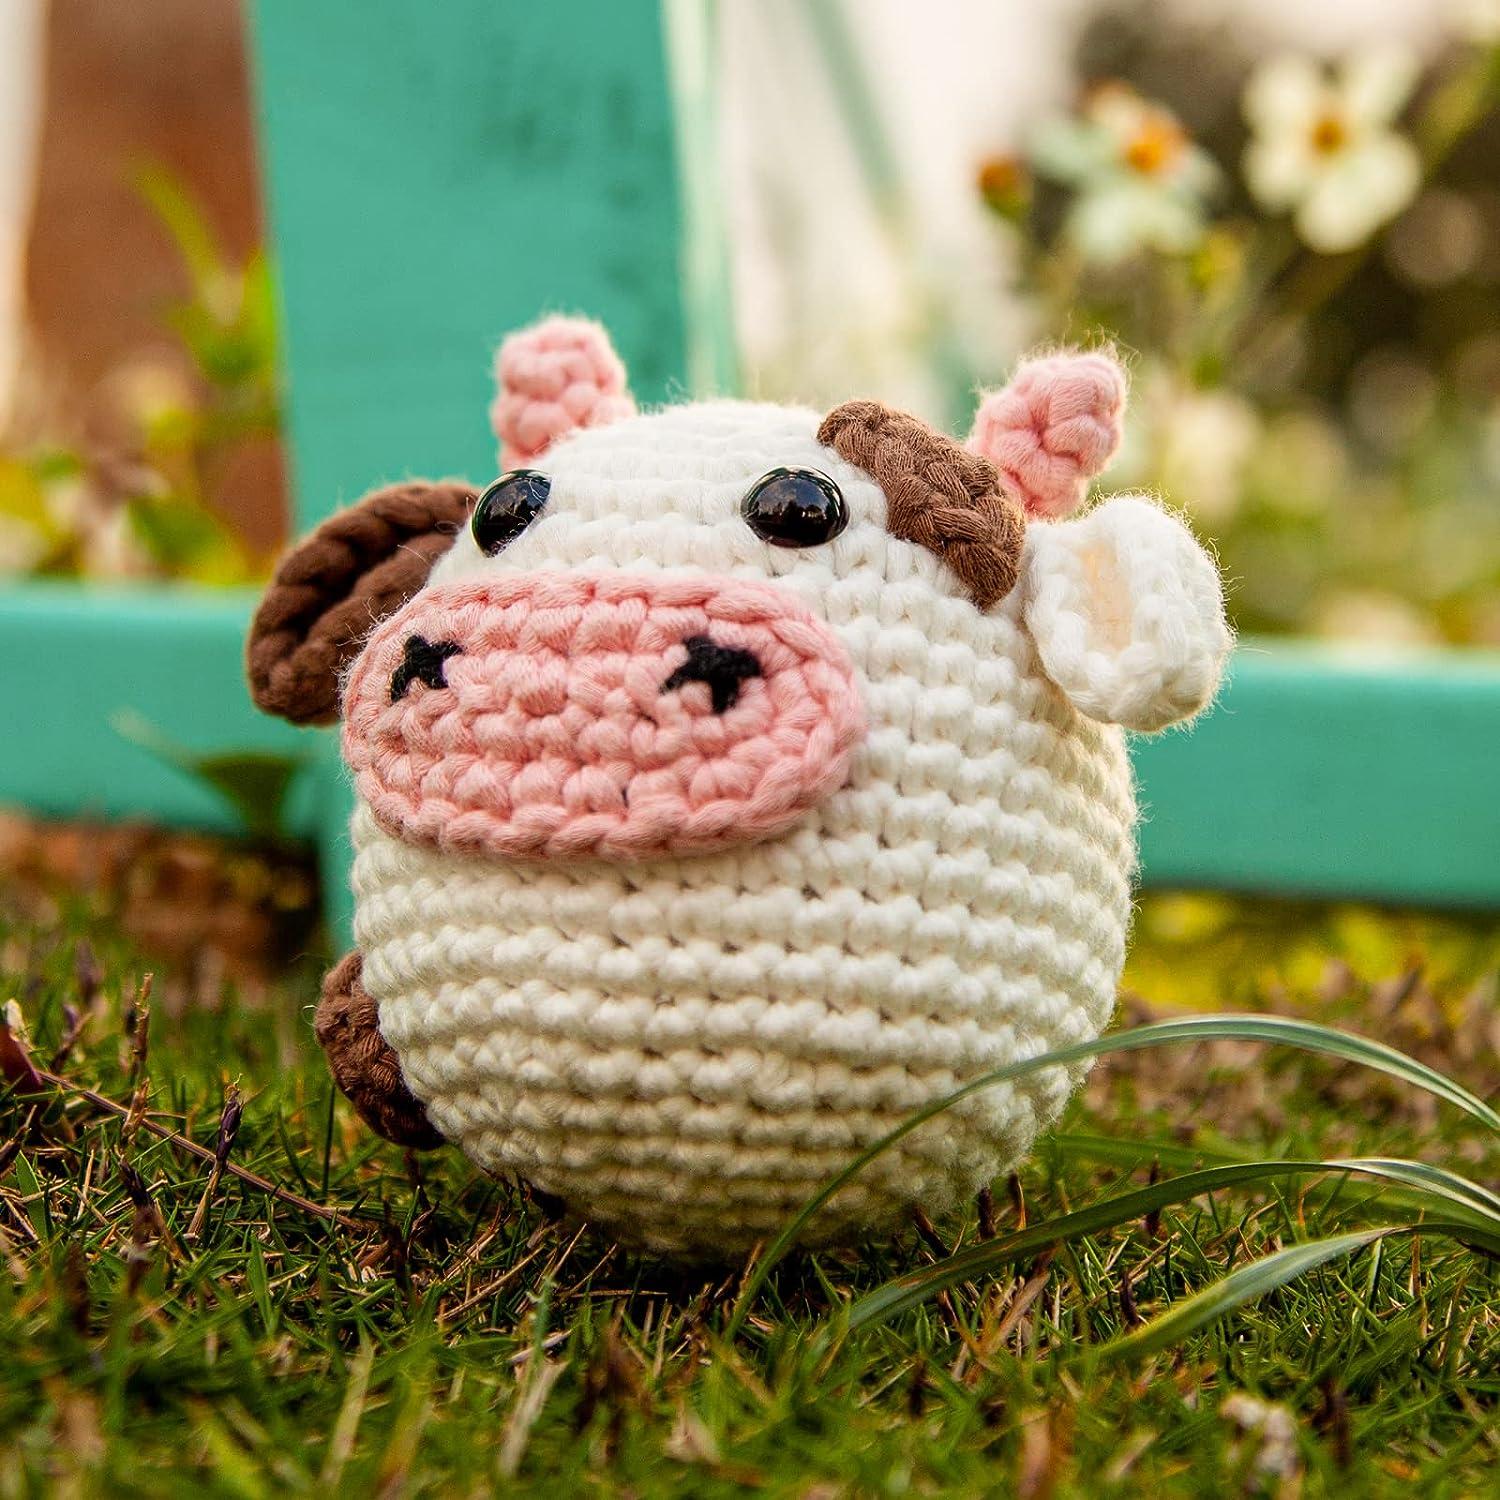 loveknotpop Crochet Kit for Beginners: Crochet Animal Kit for Adults Kids  Teens Starters, Easy Knitting Soft Yarn, Step-by-Step Video, Decompress  Cute Cow, Easter Mother Day Christmas Birthday Gift